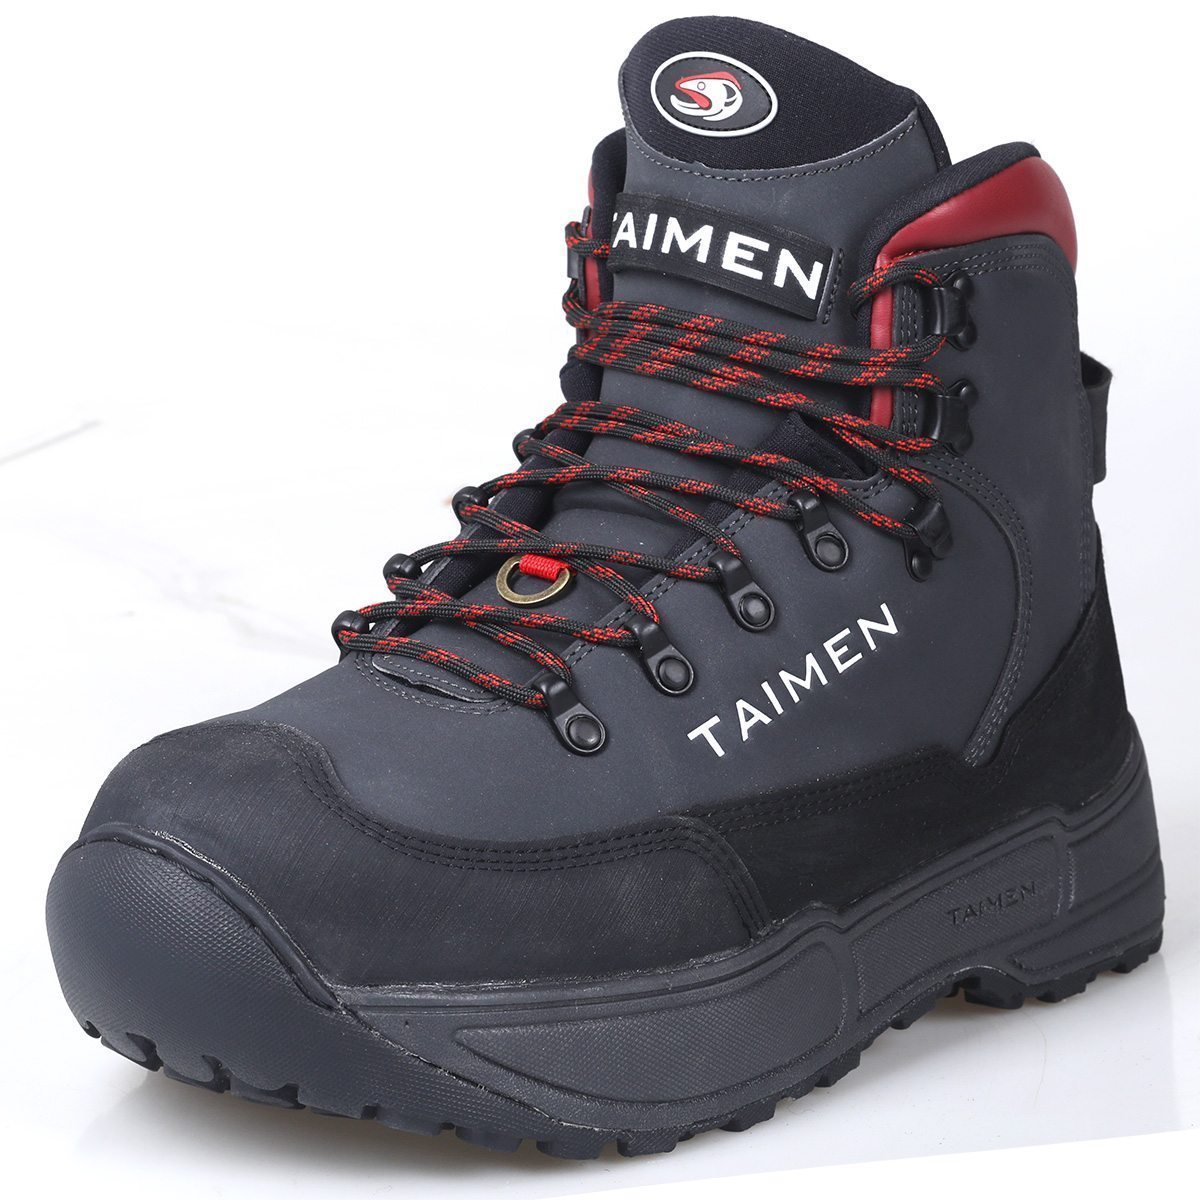 Taimen Uda Wading Boots (tung. studs incl.)